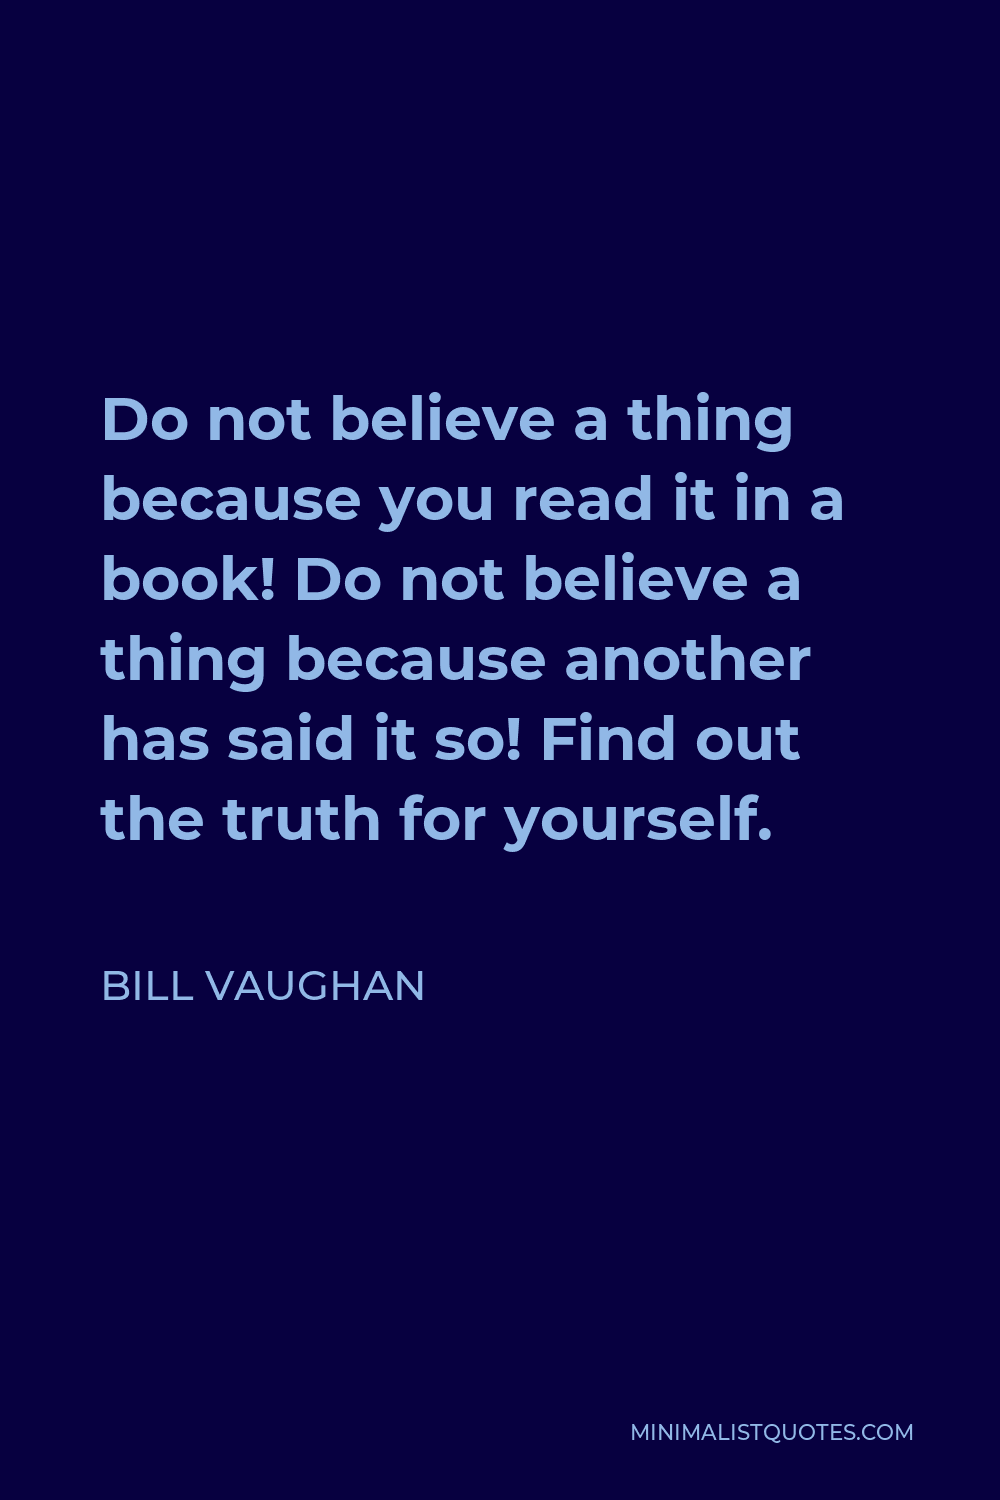 Bill Vaughan Quote - Do not believe a thing because you read it in a book! Do not believe a thing because another has said it so! Find out the truth for yourself.